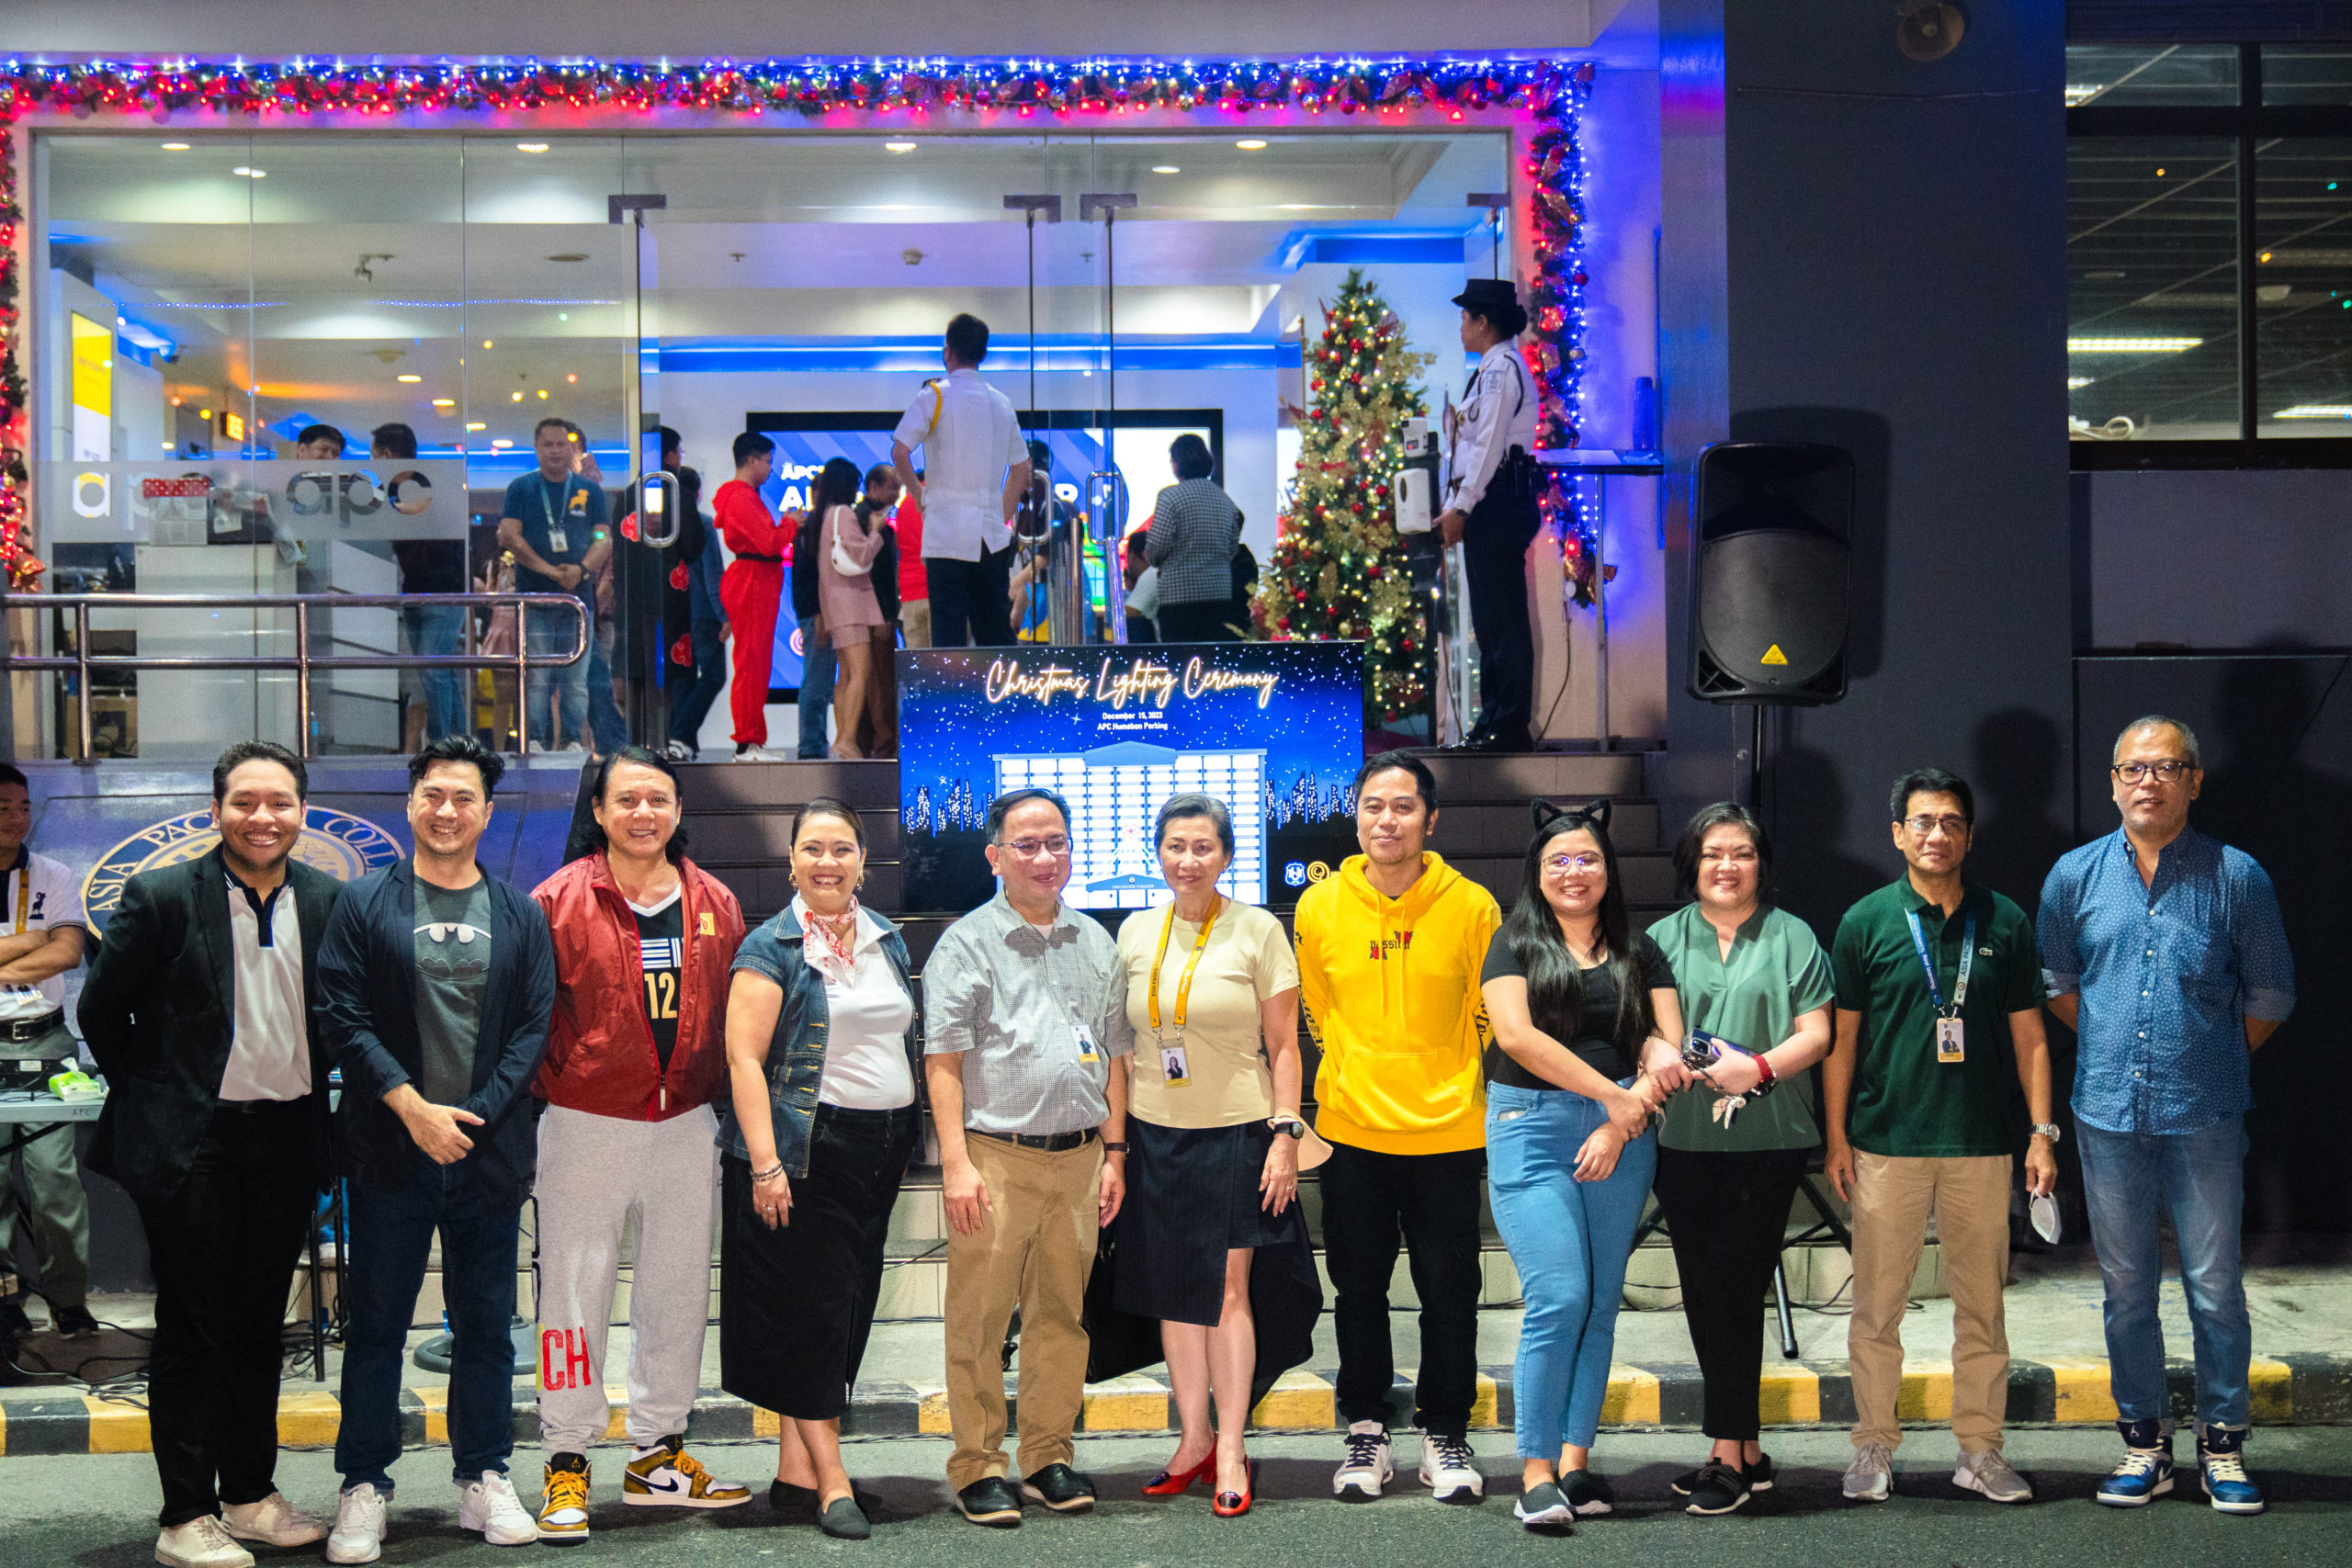 Administrators and Executive Directors of Asia Pacific College pose for a photograph together along with APC President Teresita Medado during the annual Christmas Lighting Ceremony at APC’s parking lot held last December 15, 2023. Photo by Johann Avery Marcalas